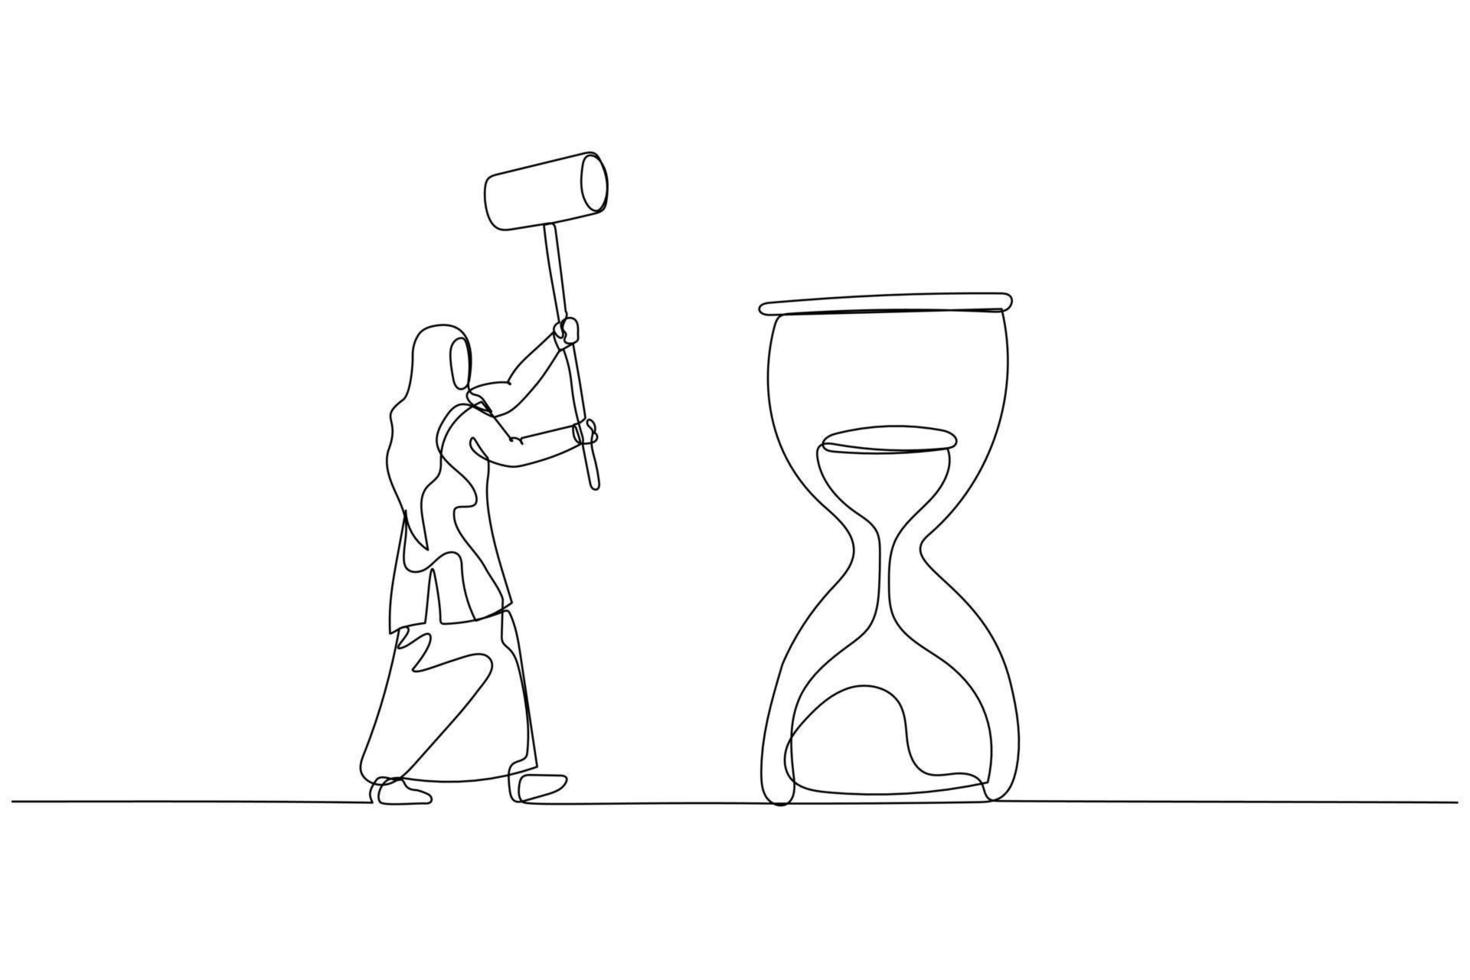 Drawing of muslim woman with hammer try to hit hourglass. Concept of time management. One continuous line art style vector